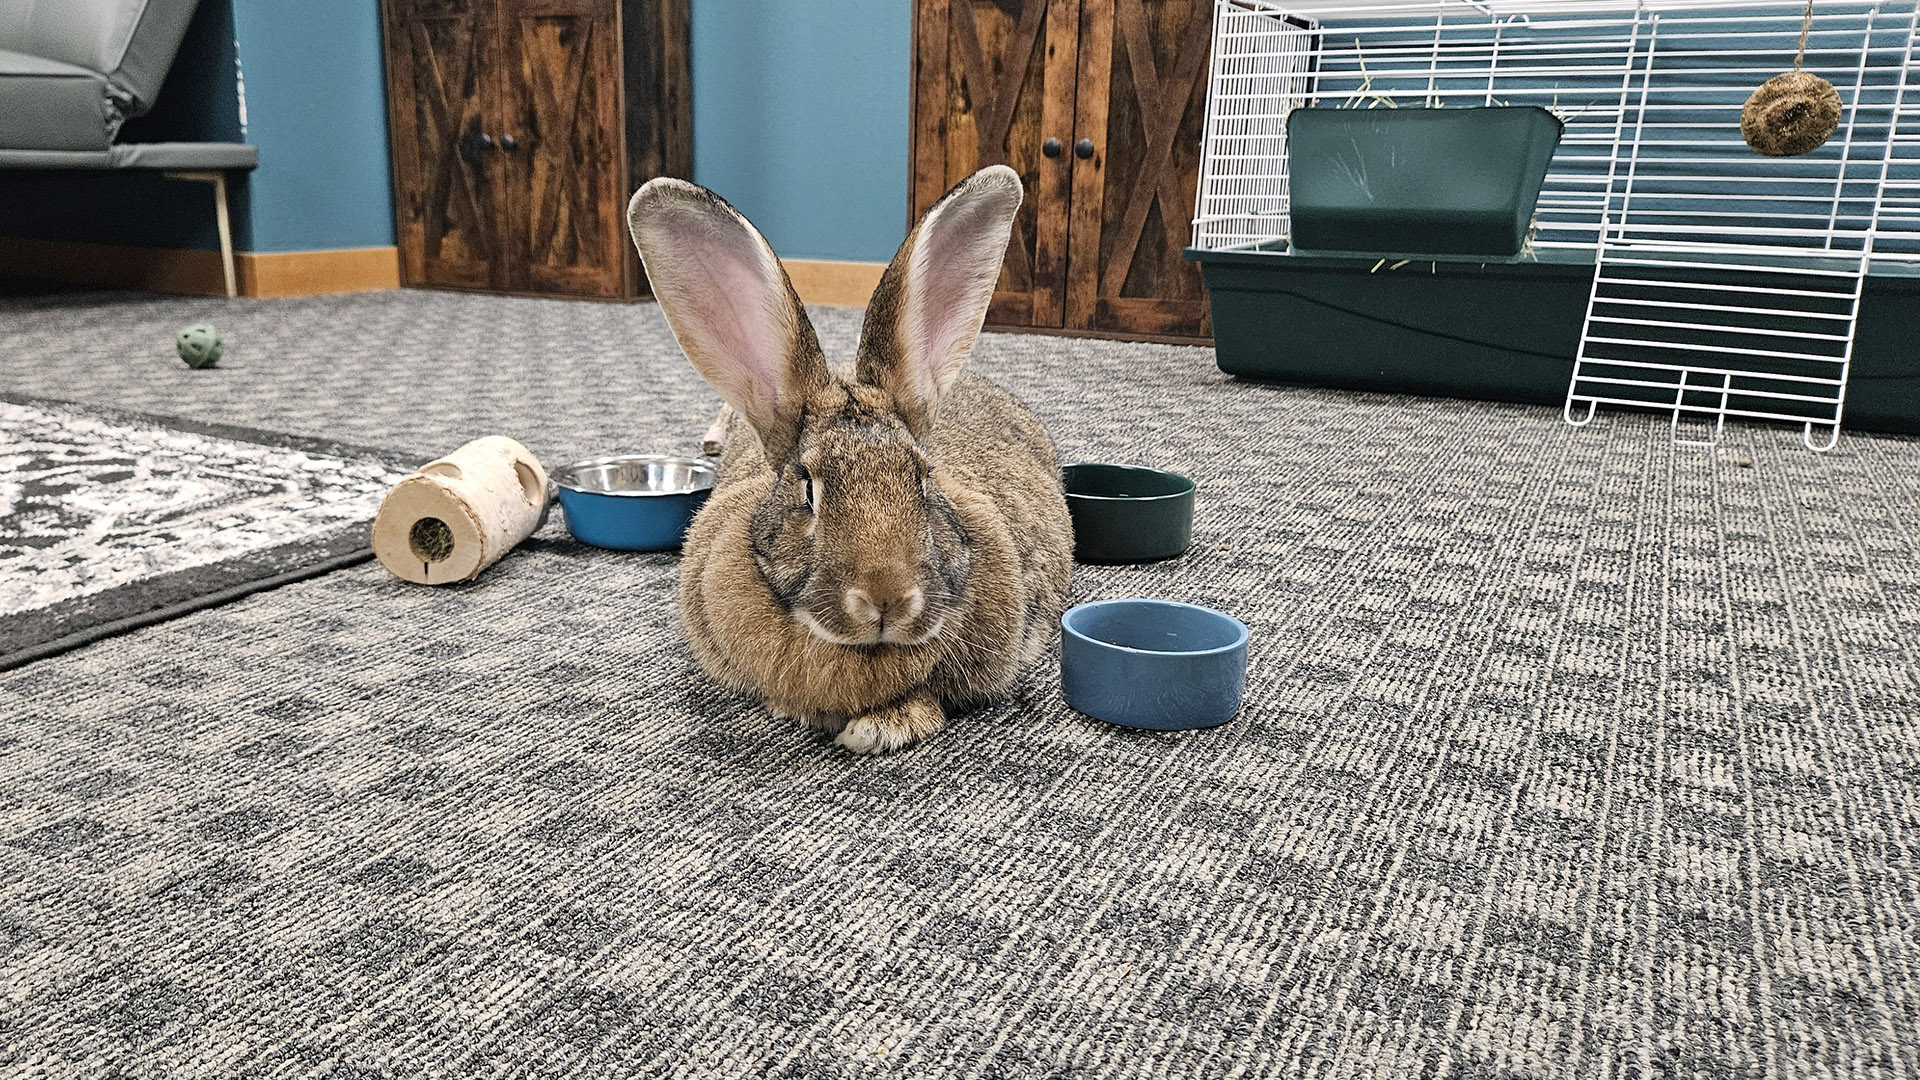 A rabbit sits on a low pile carpet, surrounded by small dishes and a piece of a log for chewing, with a wire hutch and wood cabinets with closed doors in the background.